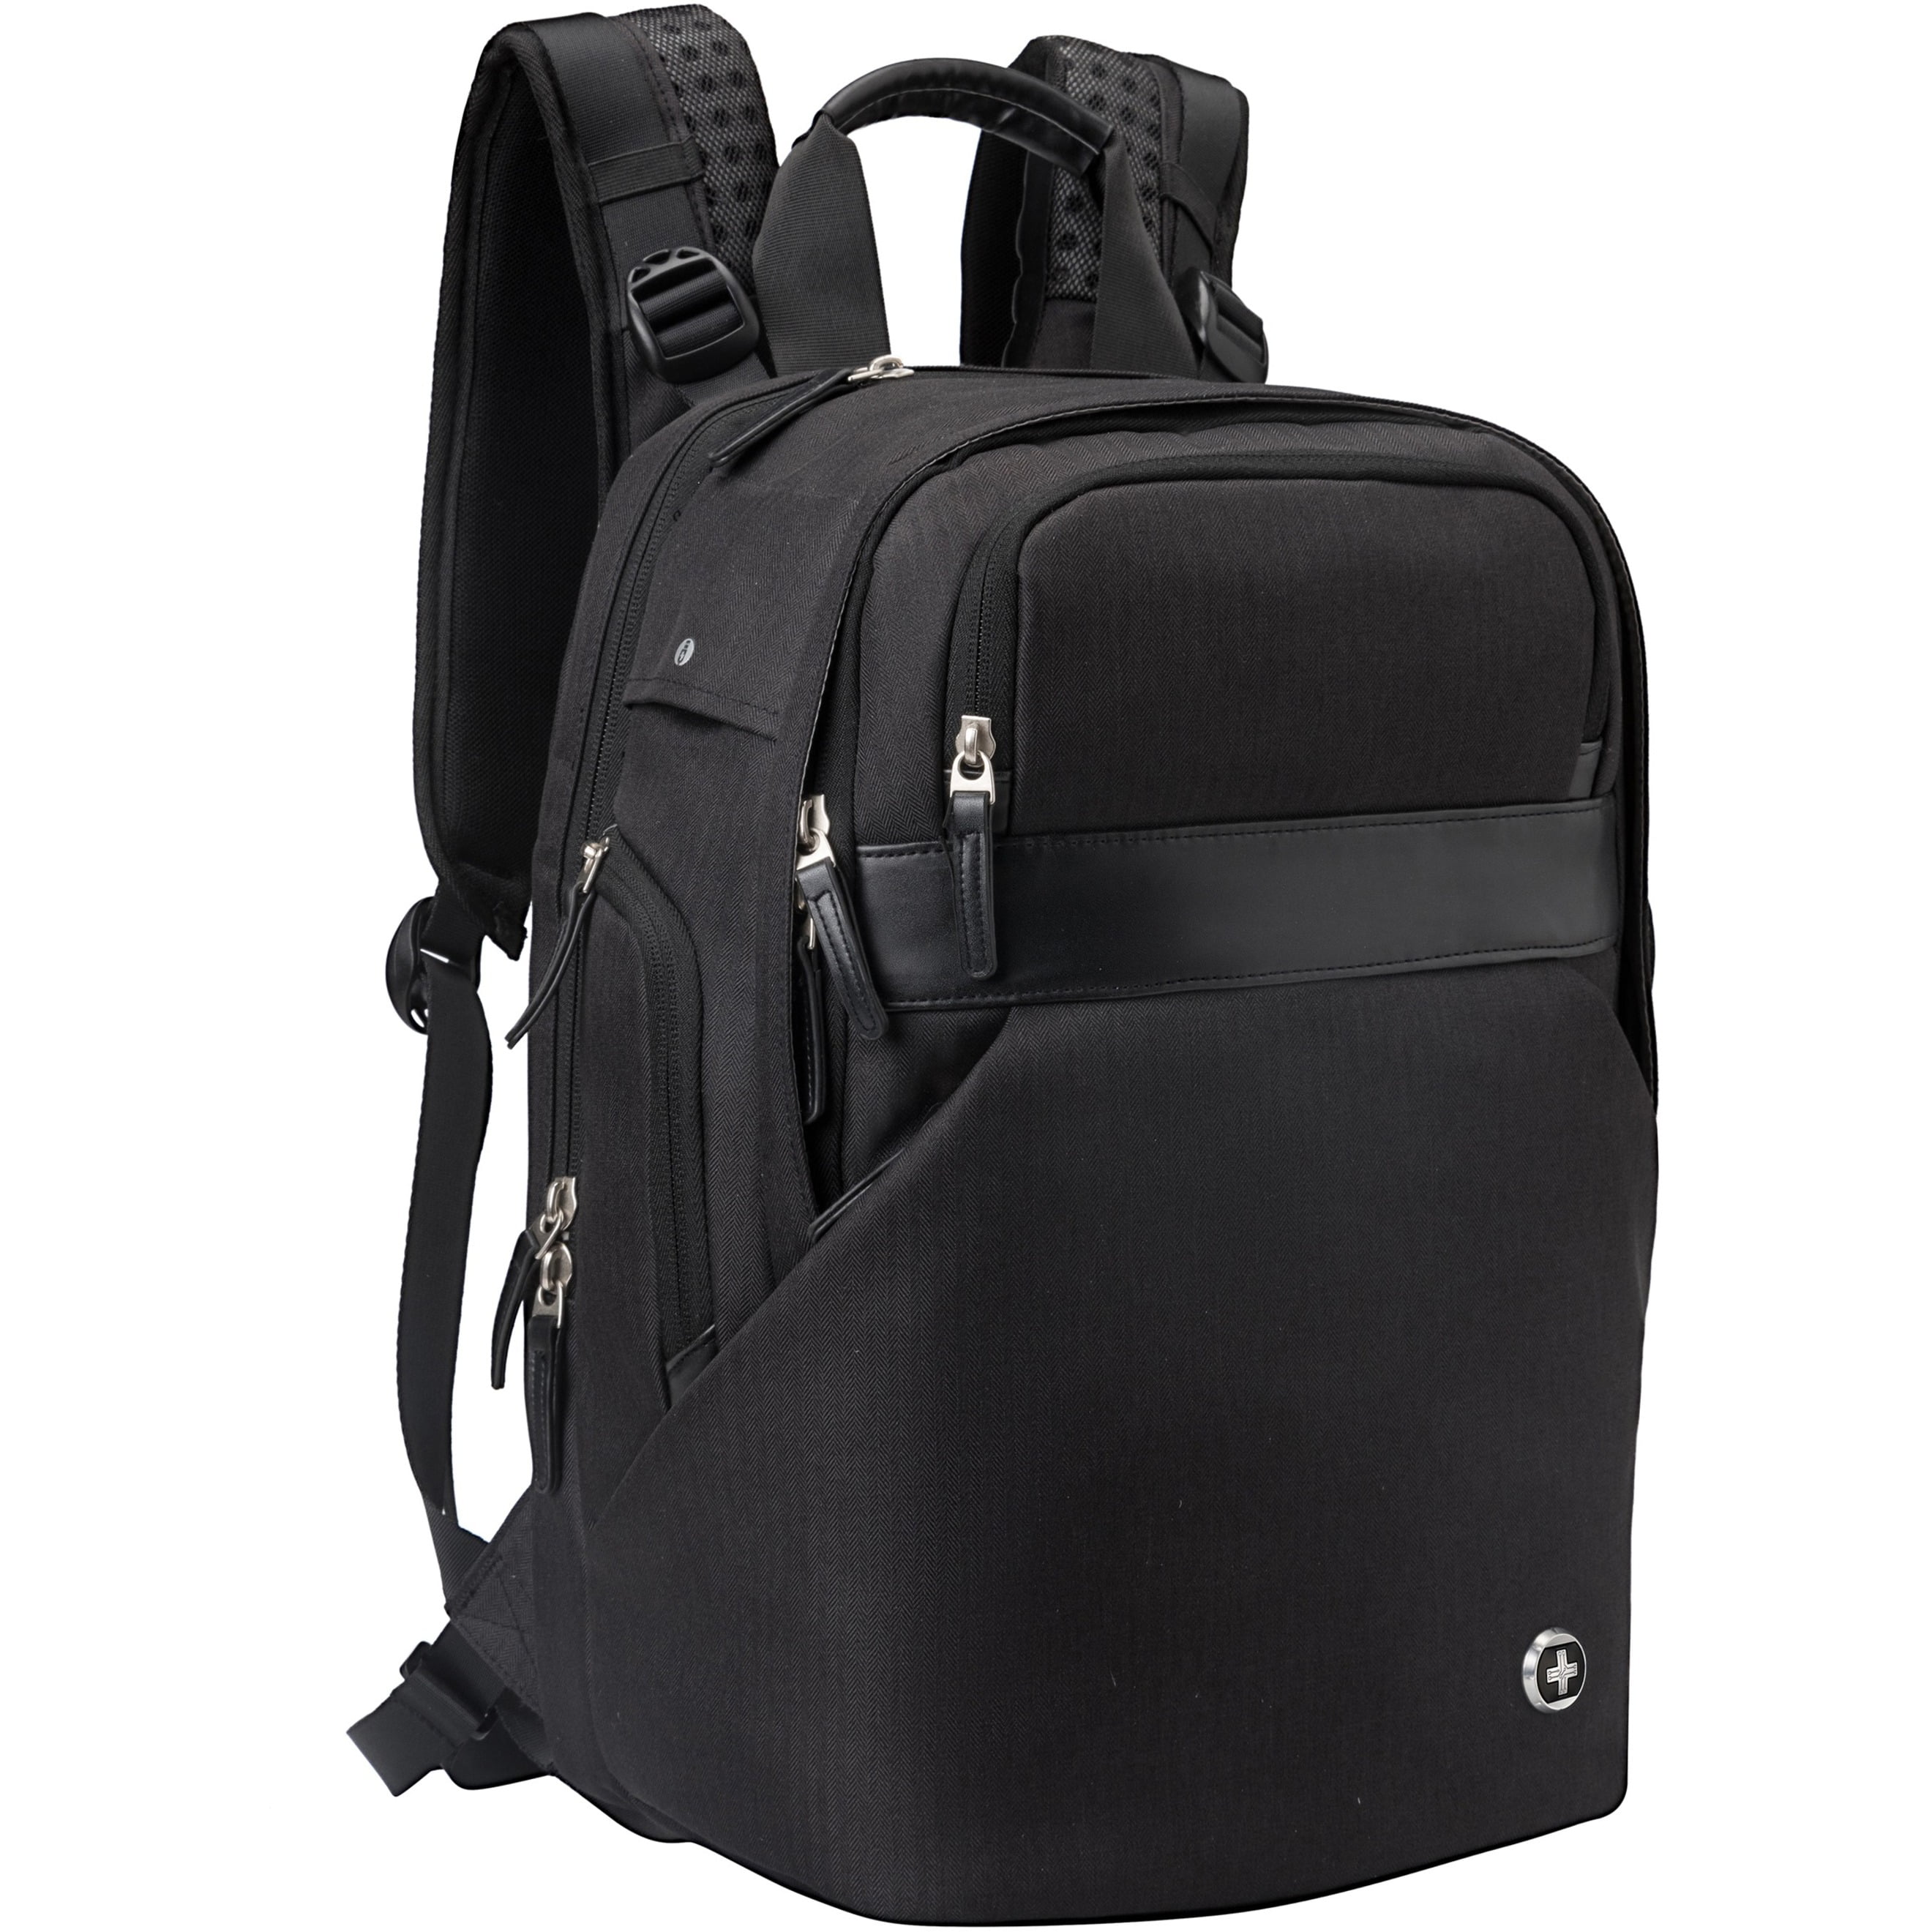 HP Mobility - Notebook Carrying Case